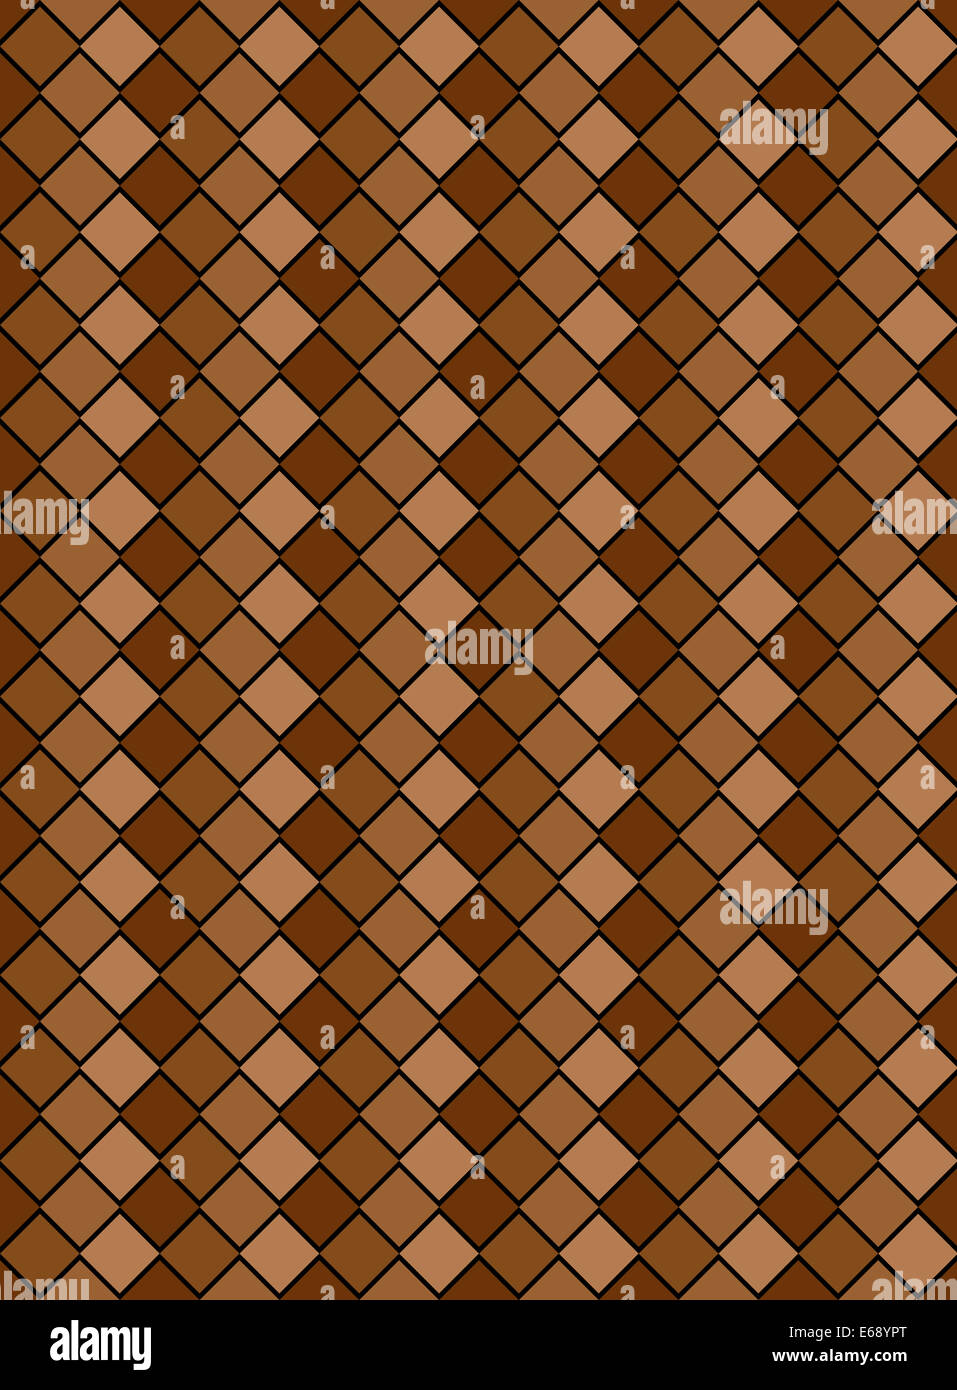 Four tones of brown and tan variegated diamond snake style wallpaper texture pattern. Stock Photo